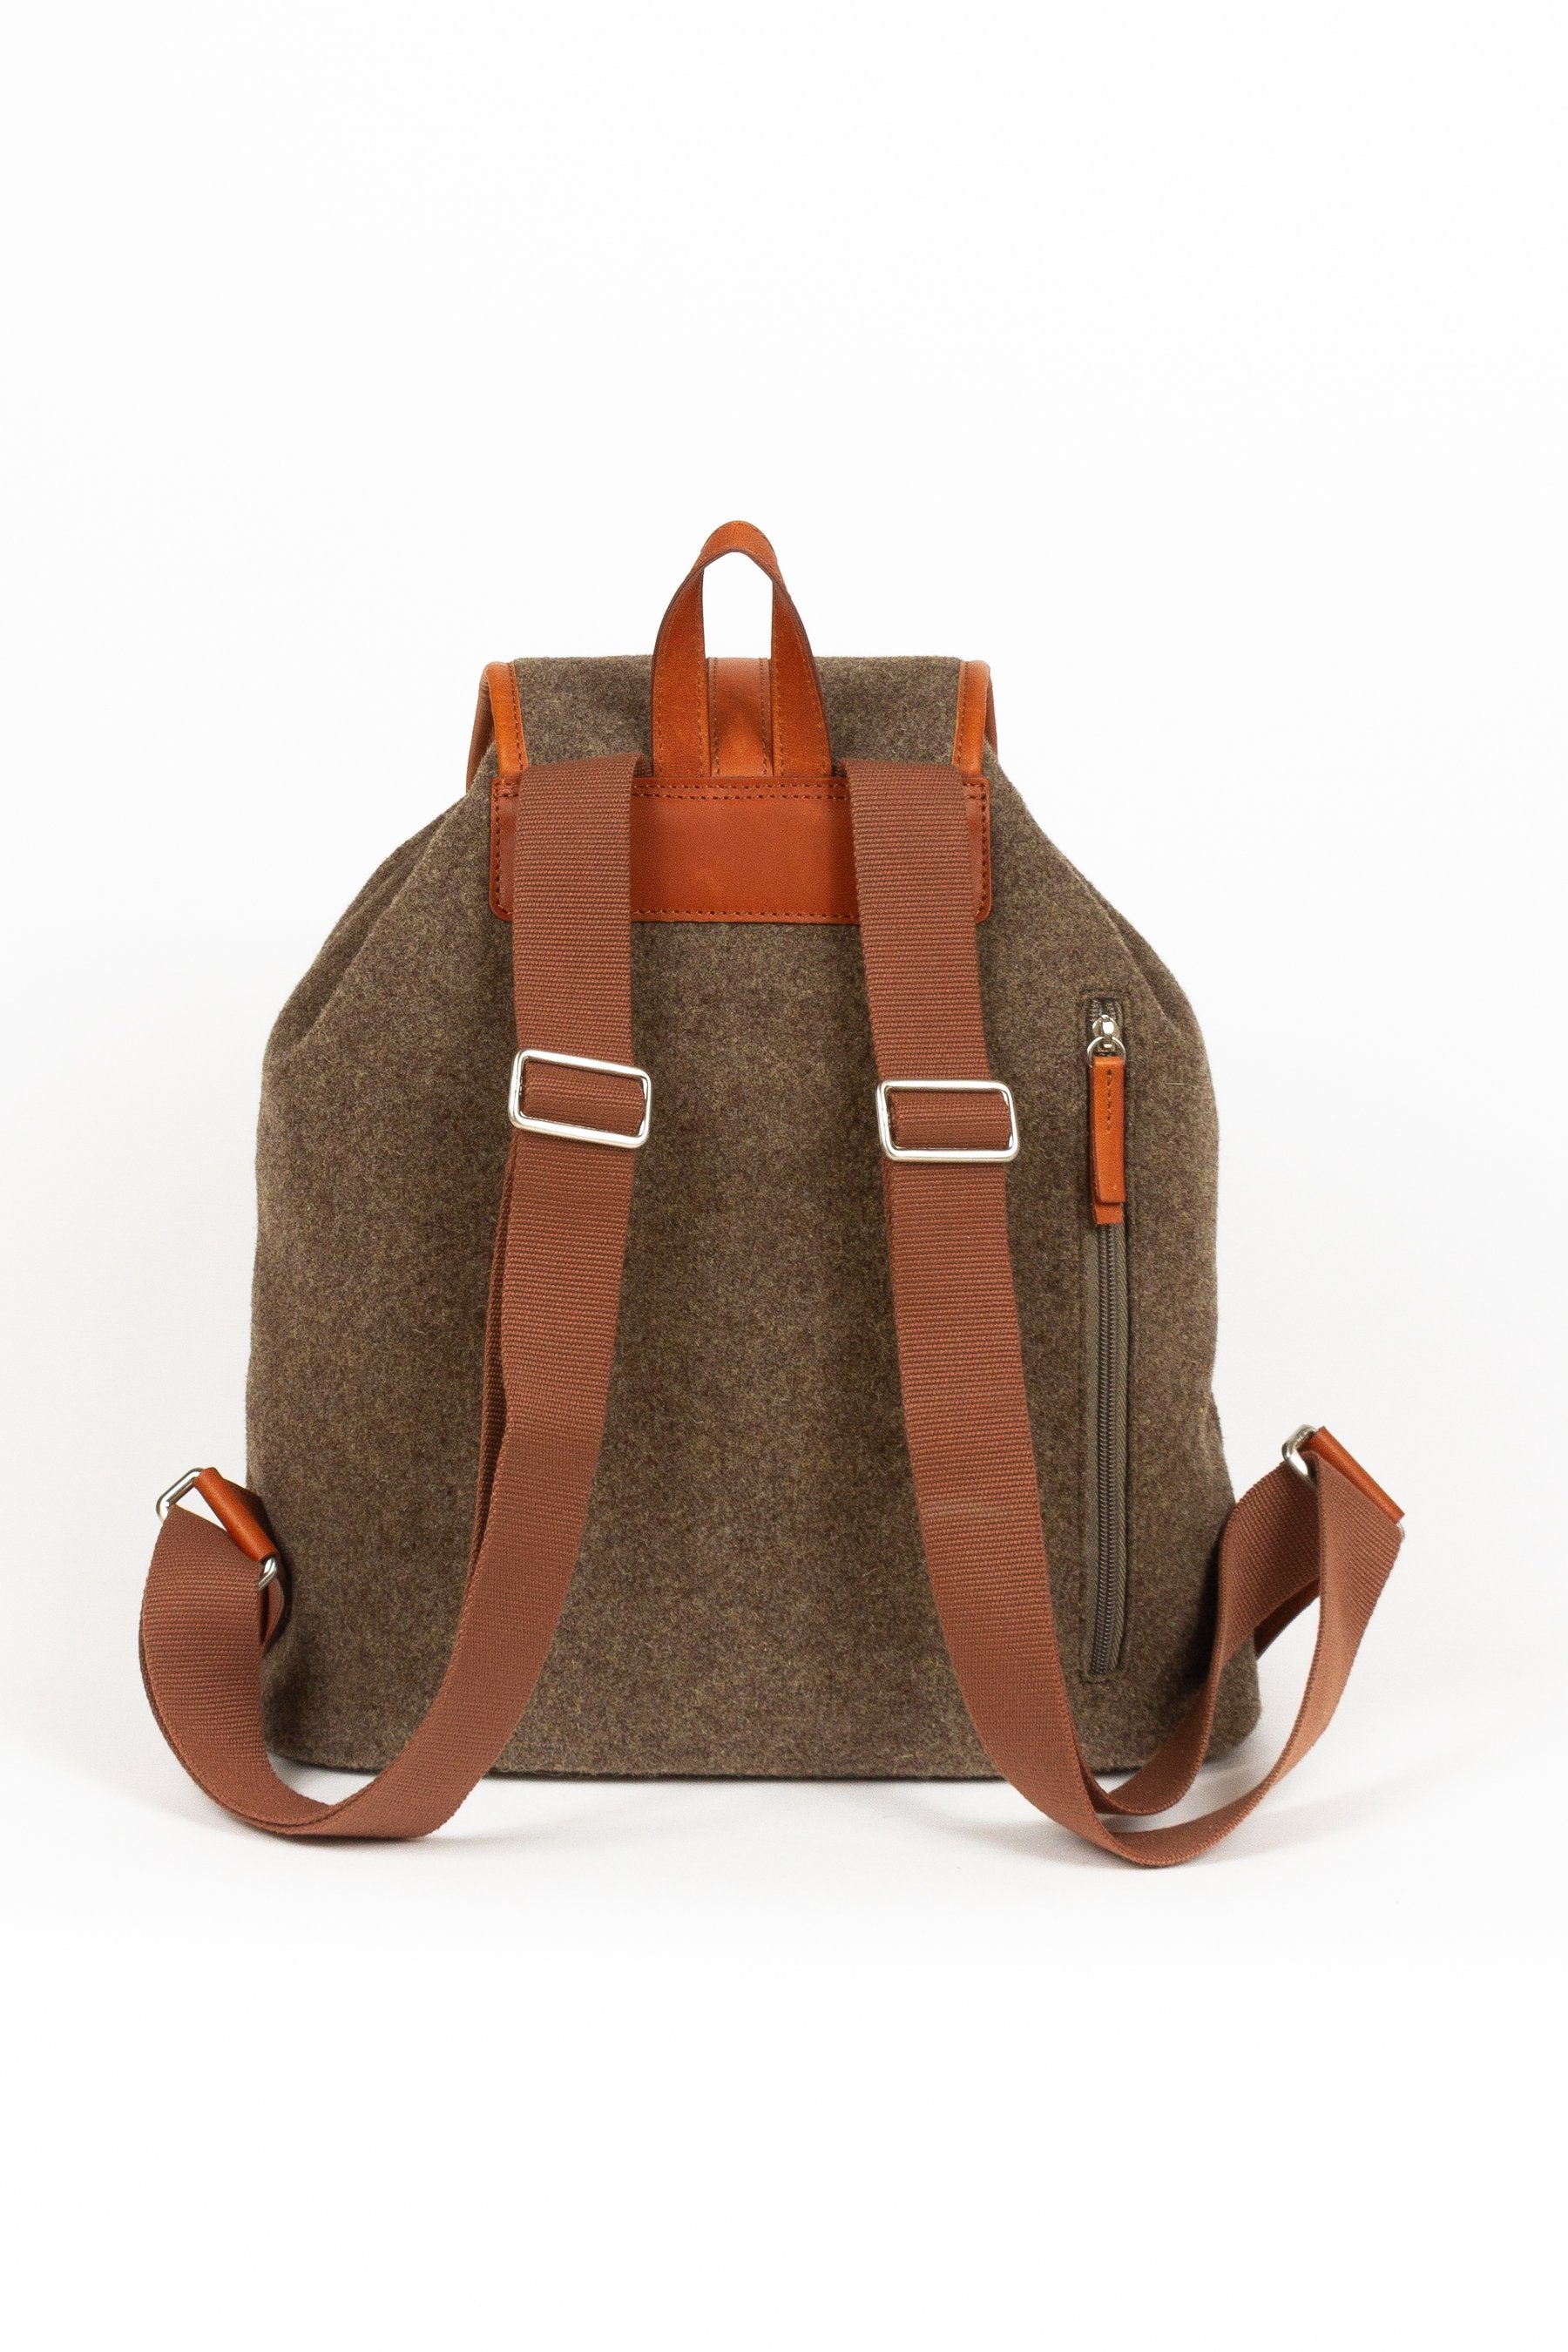 BEON.COM.AU The Farum Heritage Rucksack from Jost in Brown   Bags Jost at BEON.COM.AU